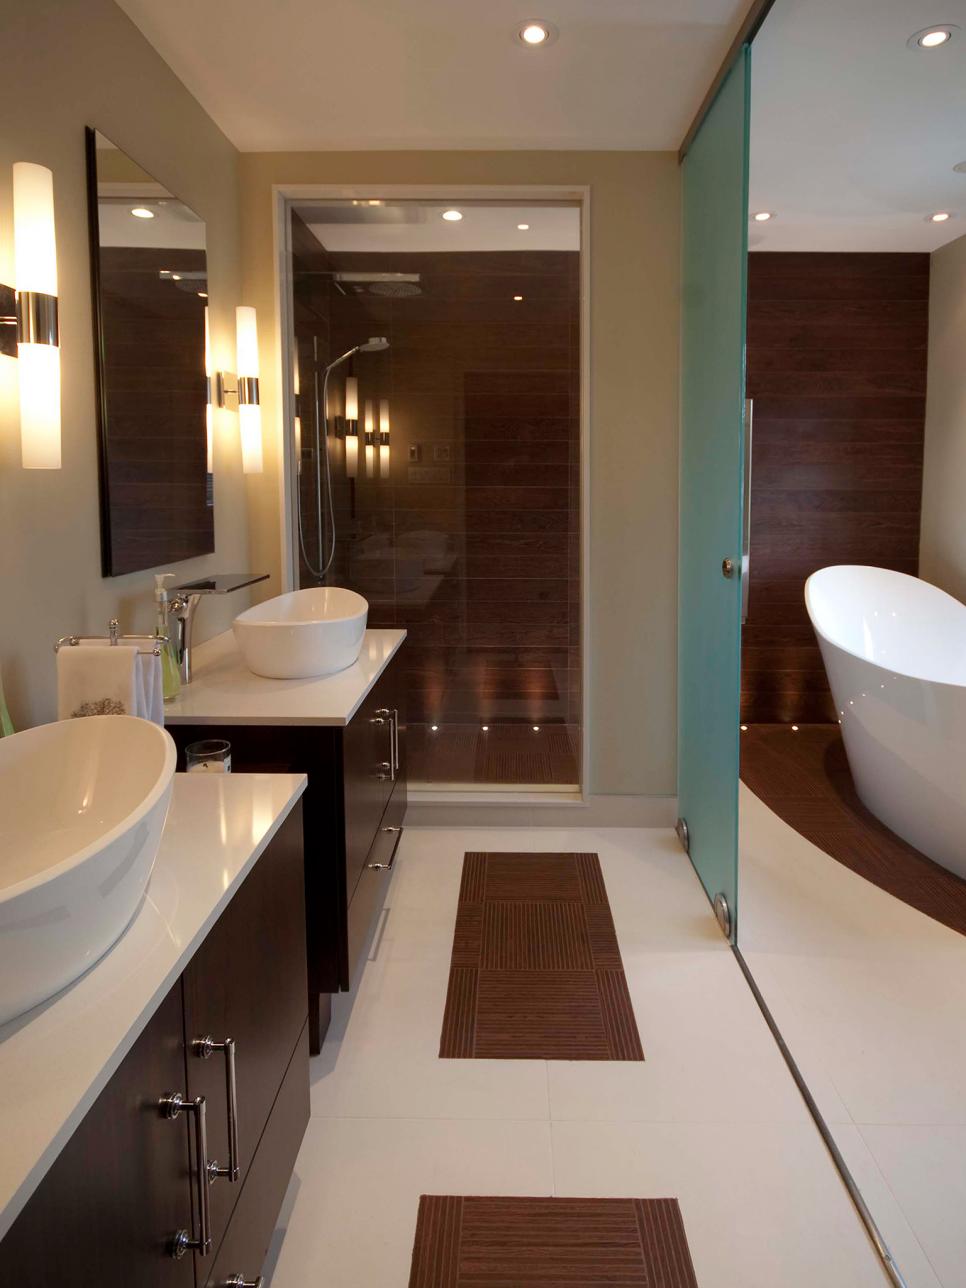 Change the entire decor with amazing bathrooms designs